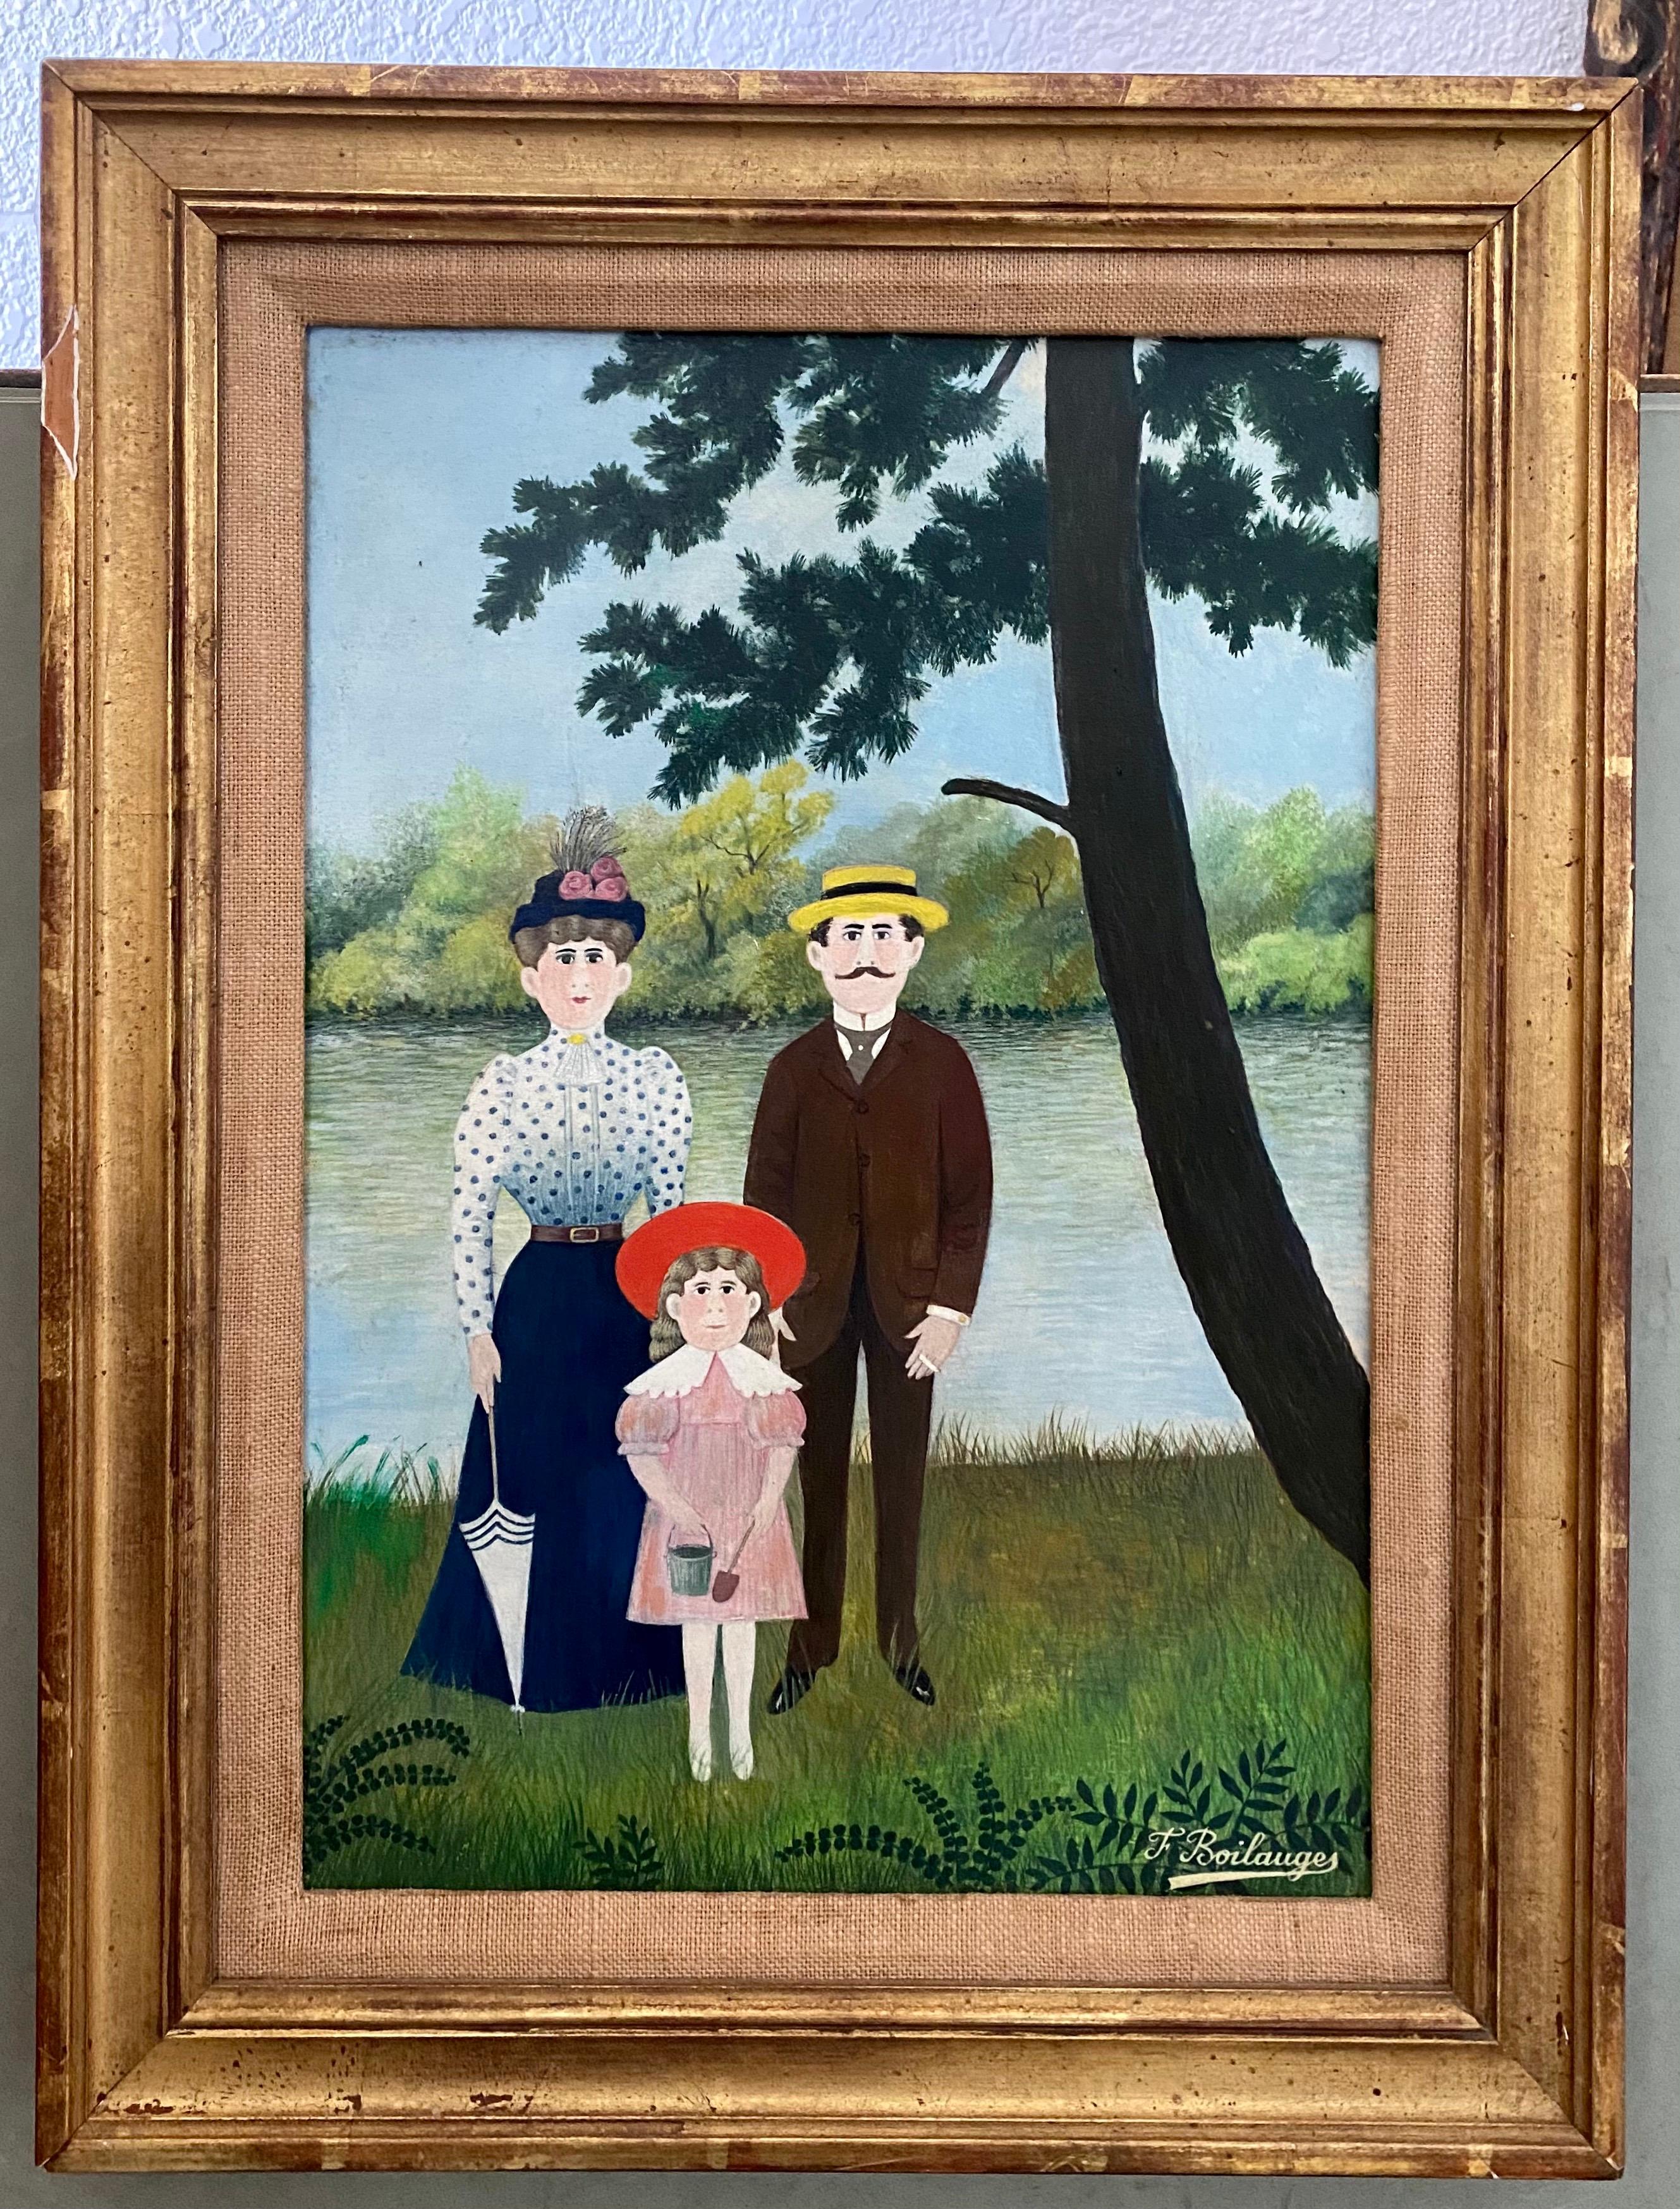 Fernand Boilauges - French Folk Art, Naive, Primitive, Oil Painting "Family  Outing" F. Boilauges For Sale at 1stDibs | french primitive painters